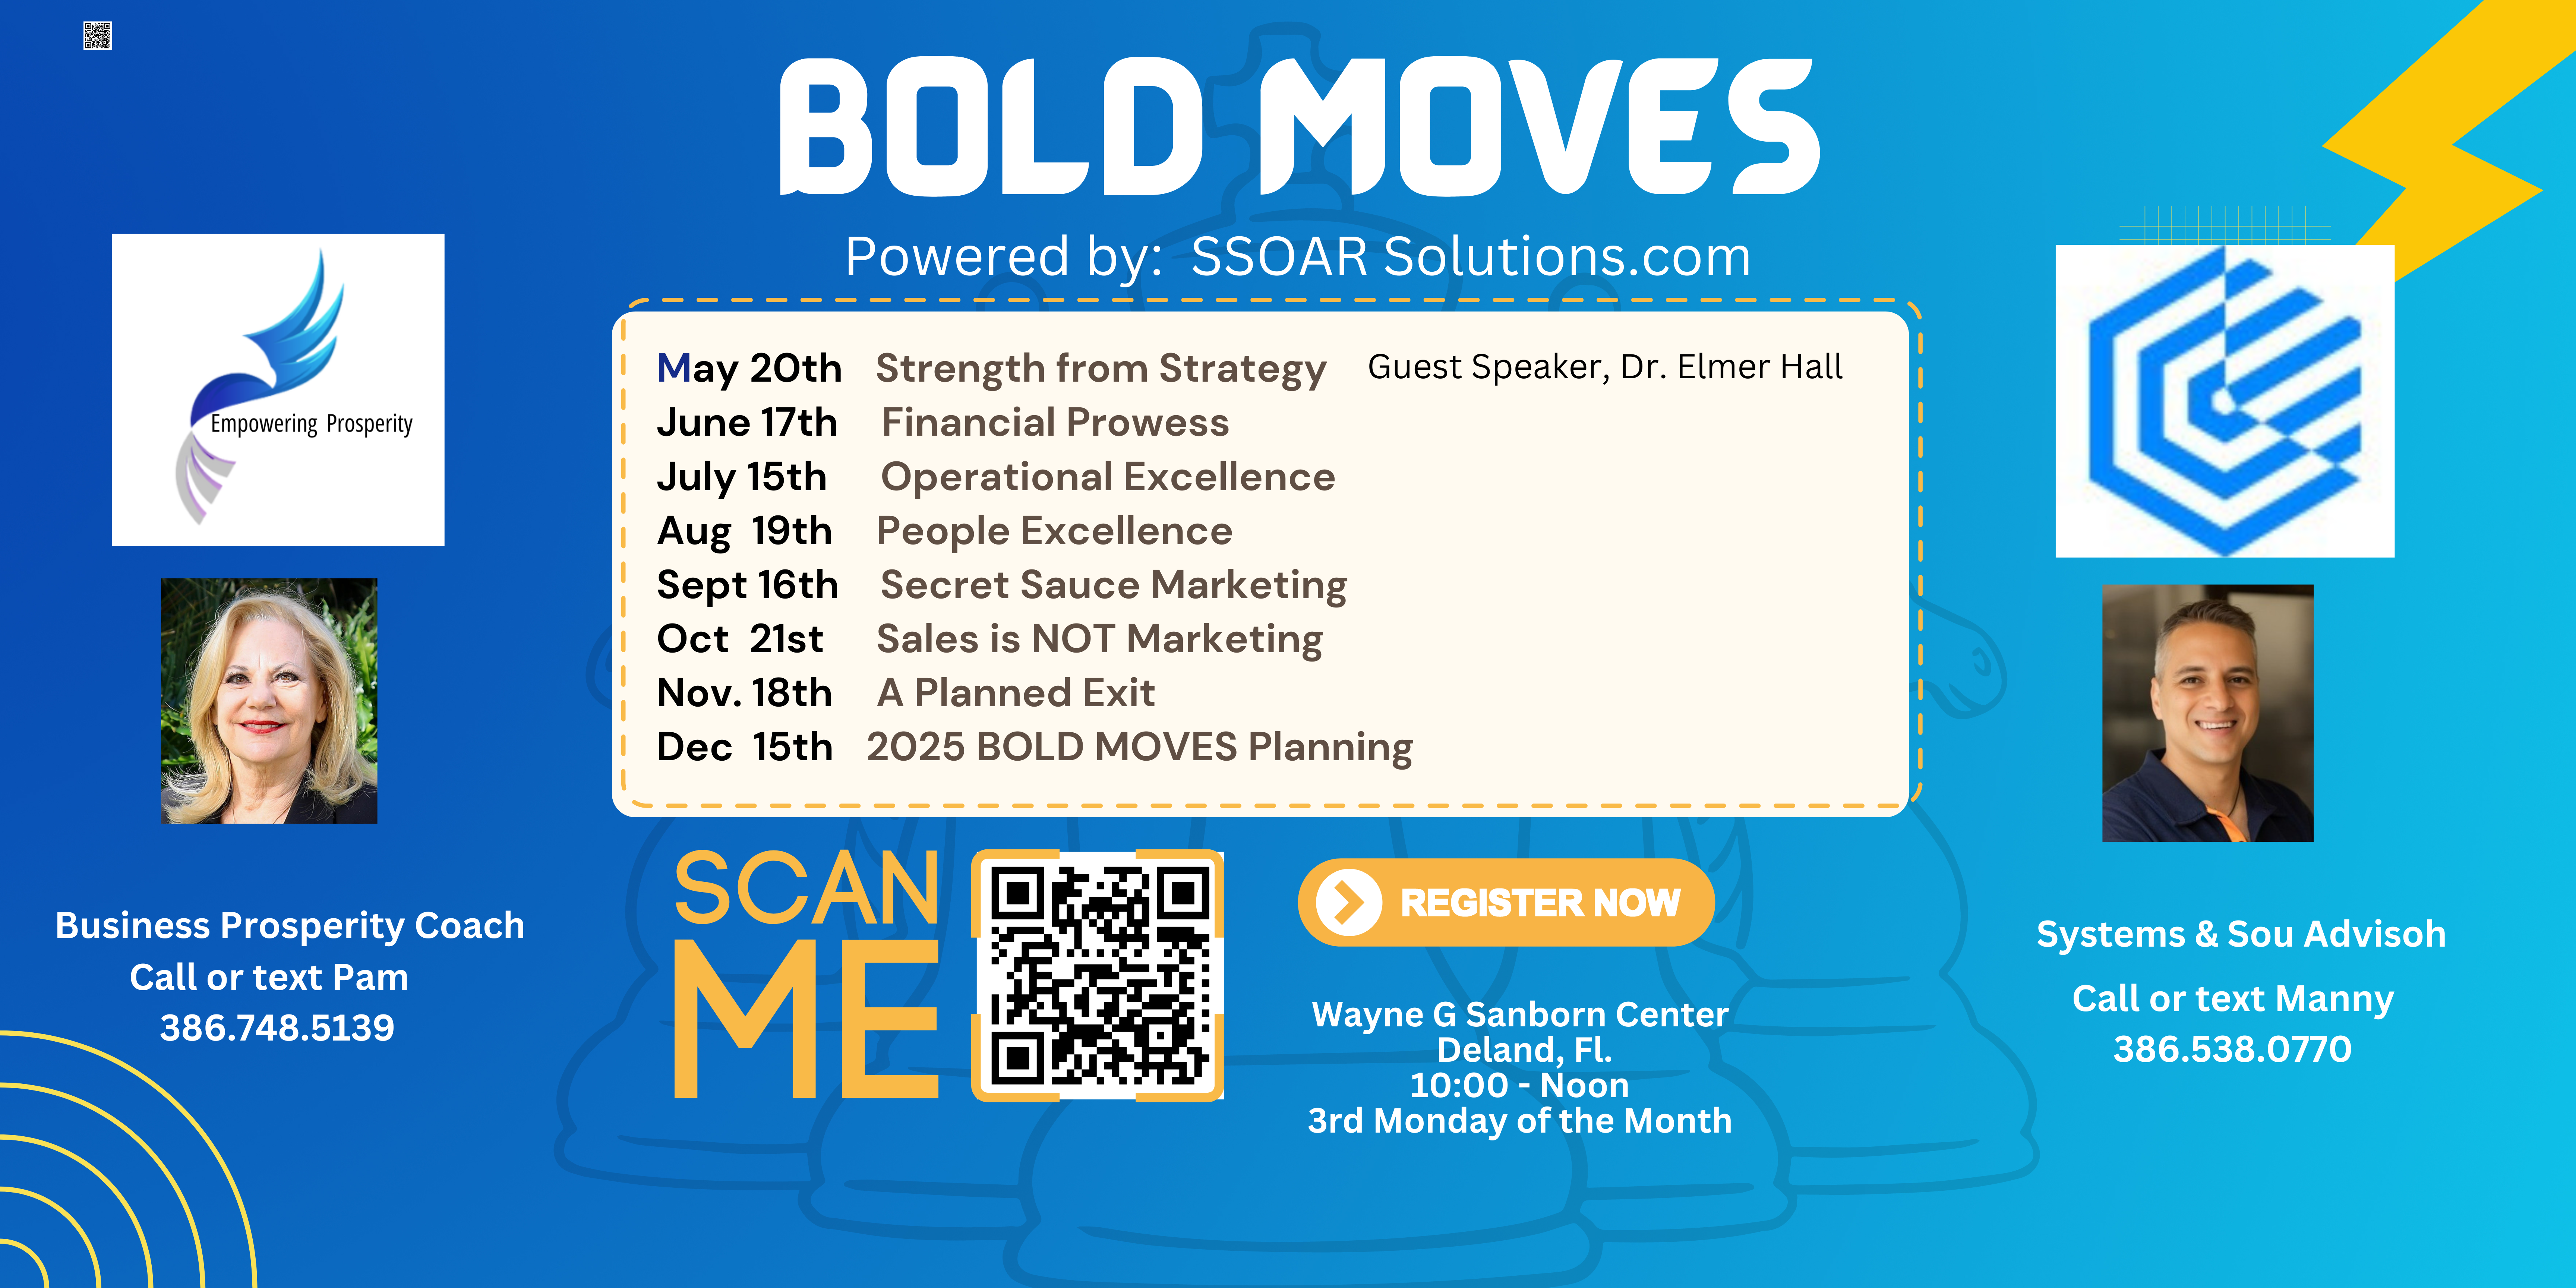 Create the BOLD MOVES needed in your business to make your business soar.  Register now.